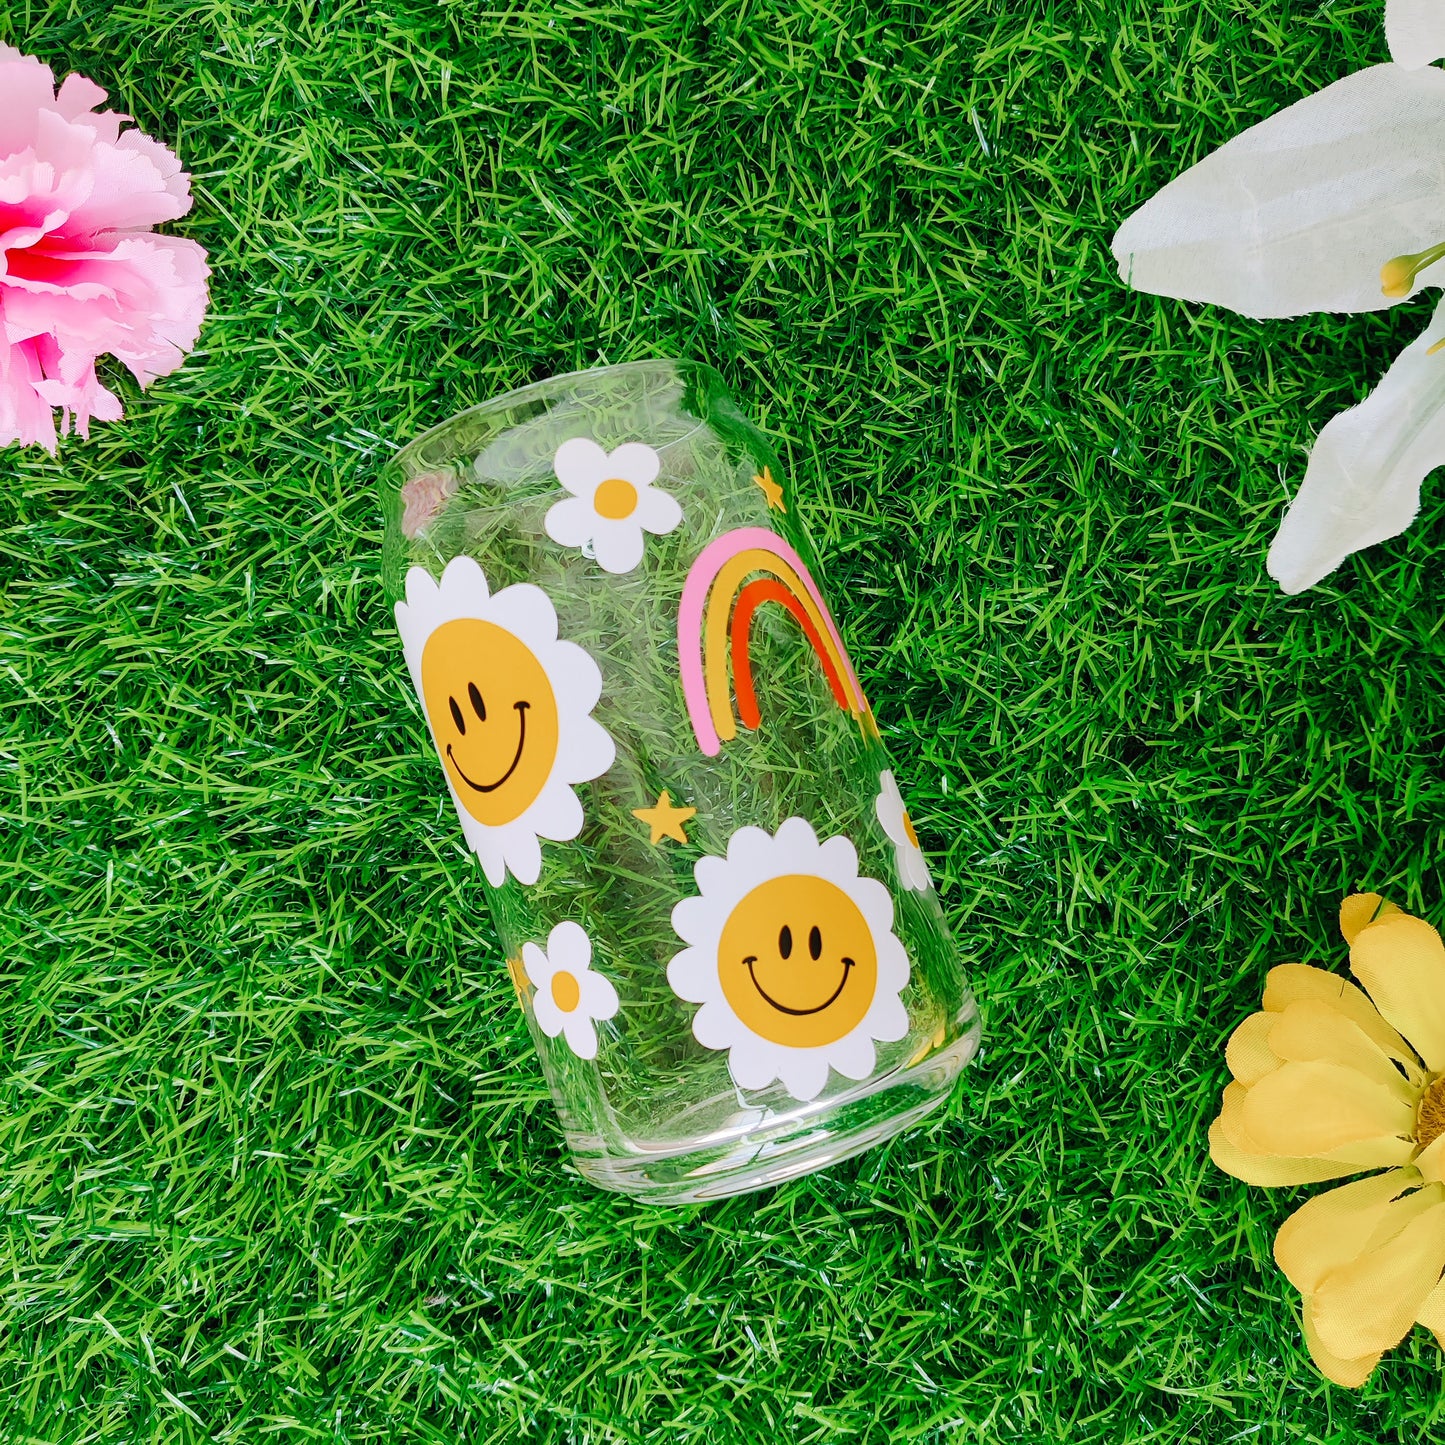 Smiley Daisy Can Glass Cup